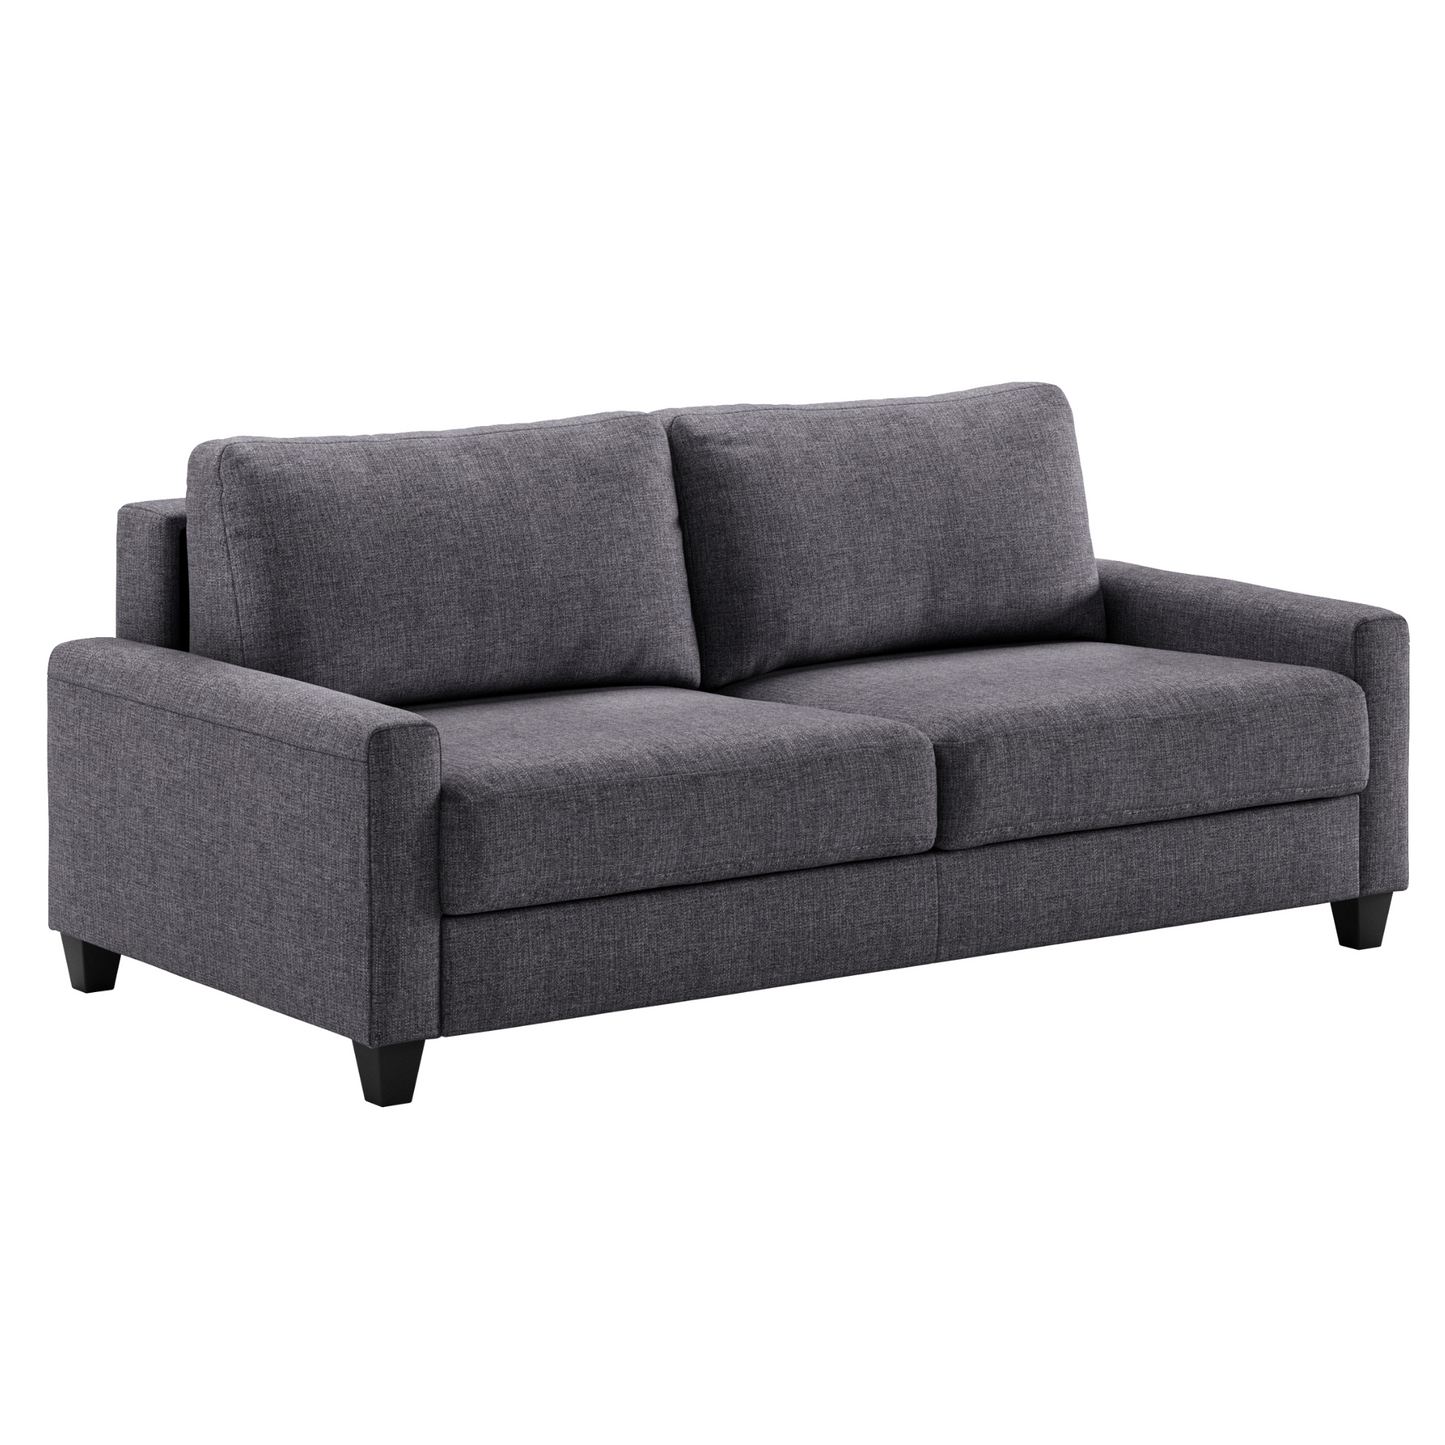 Luonto Nico Queen Sleeper Sofa Quick Ship Program in Rene 04 Fabric (charcoal) with Wood Leg from the Side